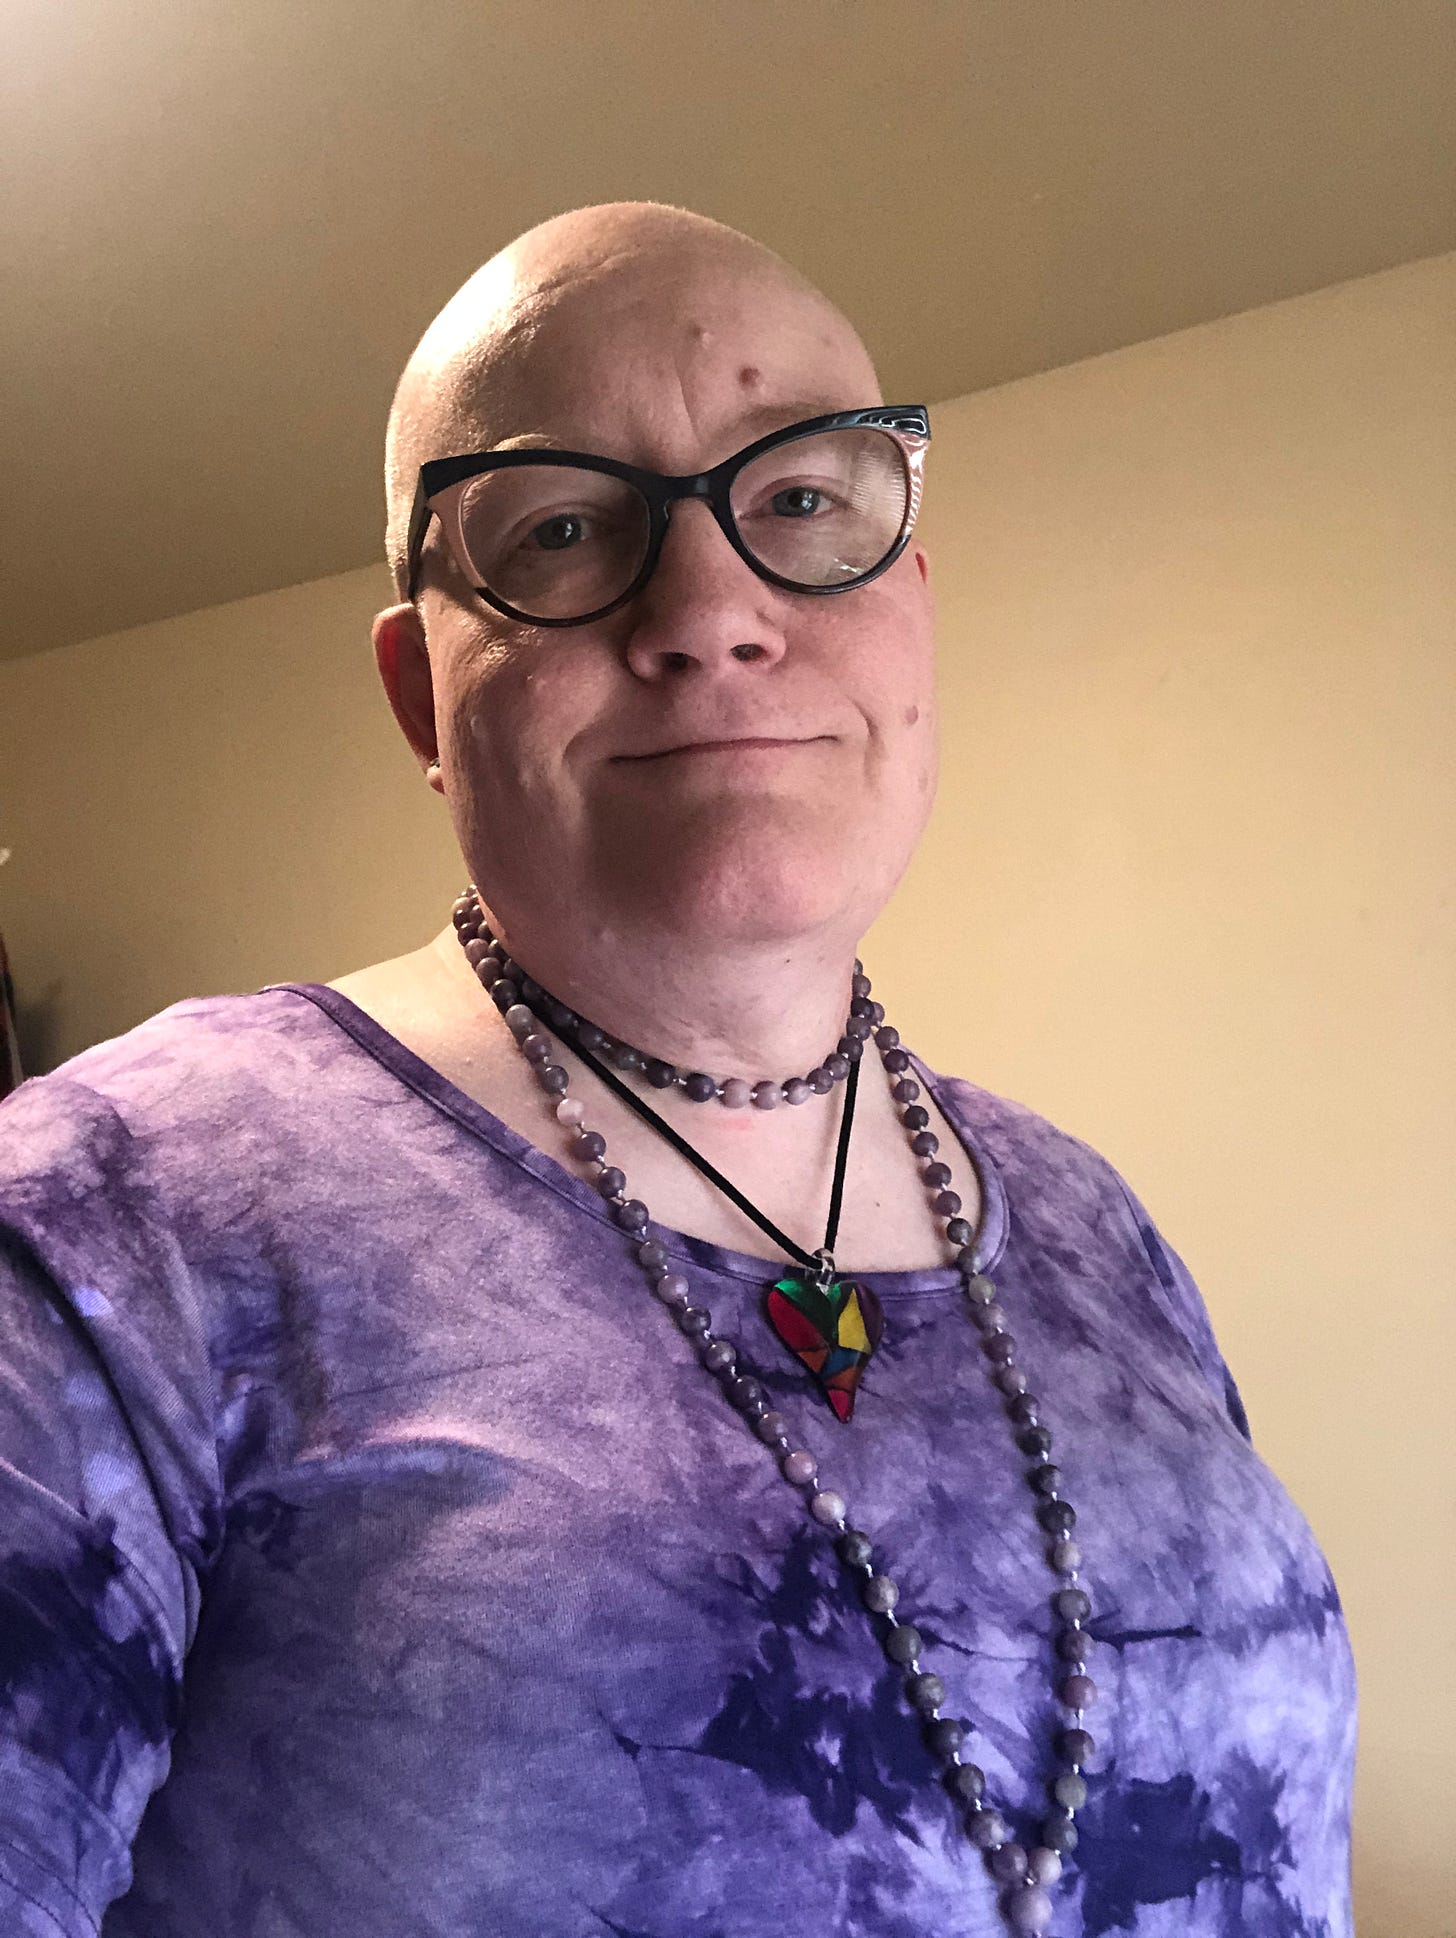 Selfie of Qid Love, a transfemme person with a bald head, wearing horn-rimmed glasses, a light purple mala, a blown glass heart pendant, and a purple tie-dyed tunic.